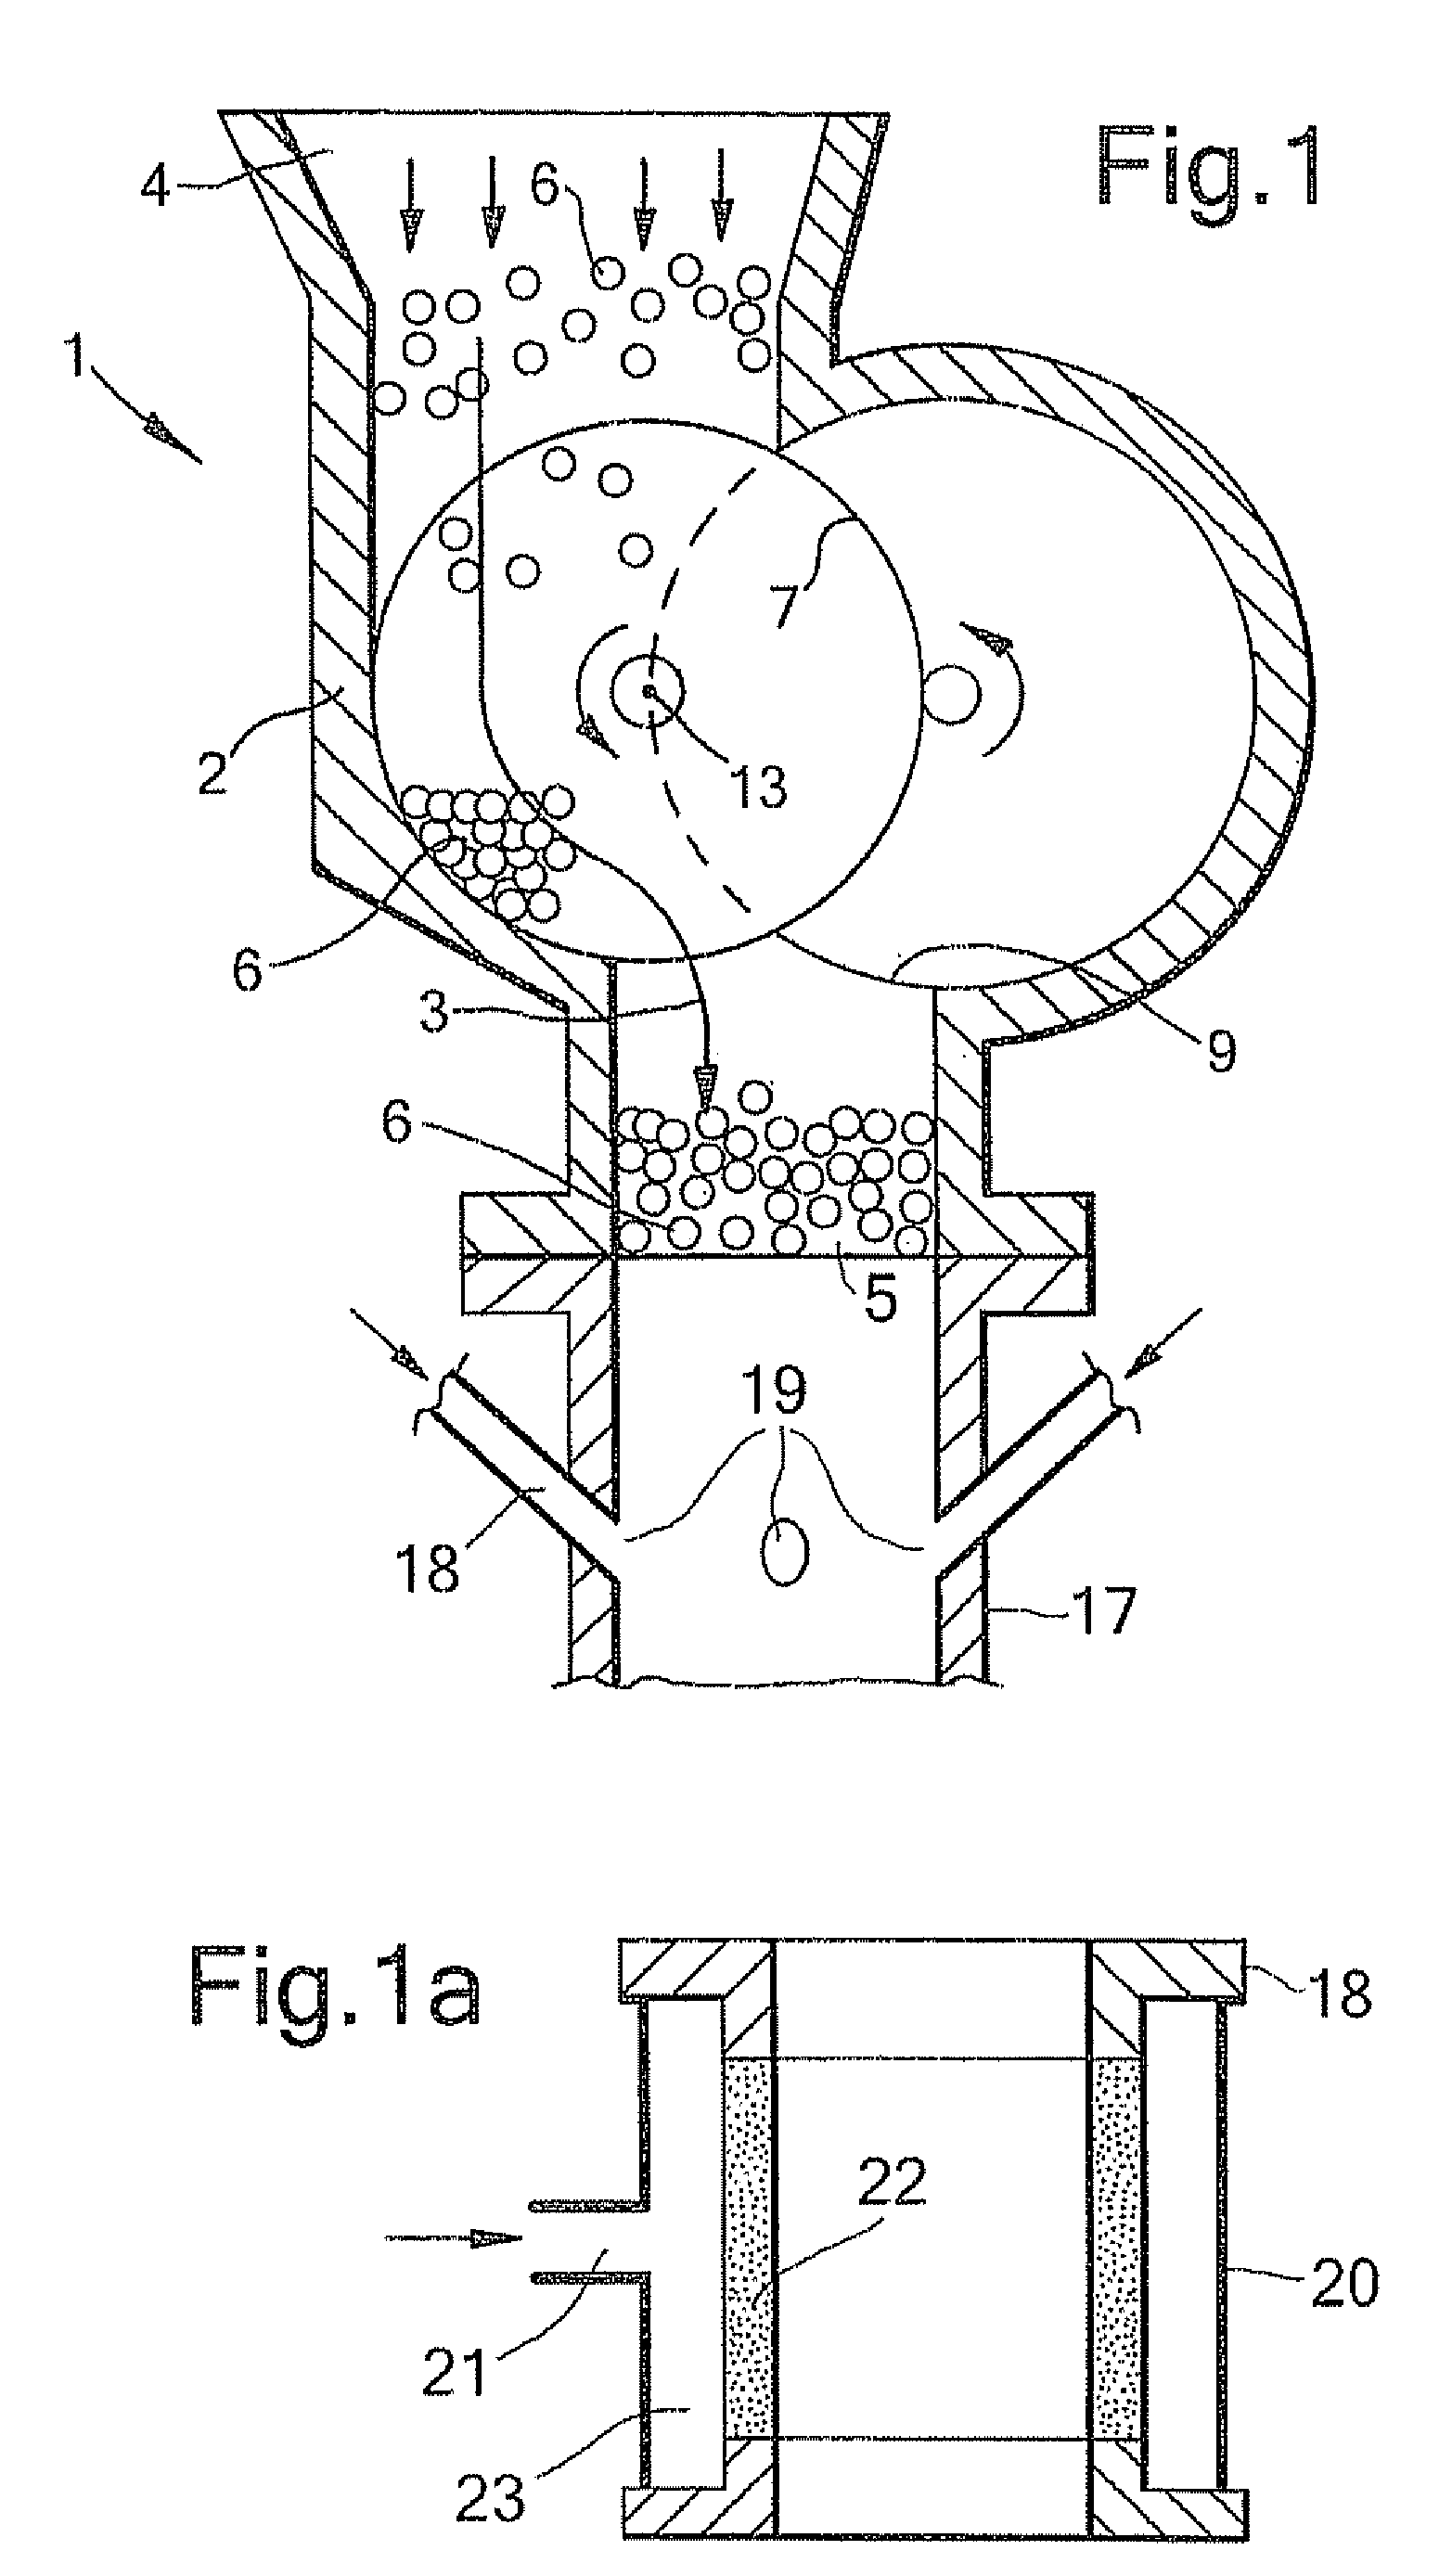 Process to provide a particulate solid material to a pressurised reactor